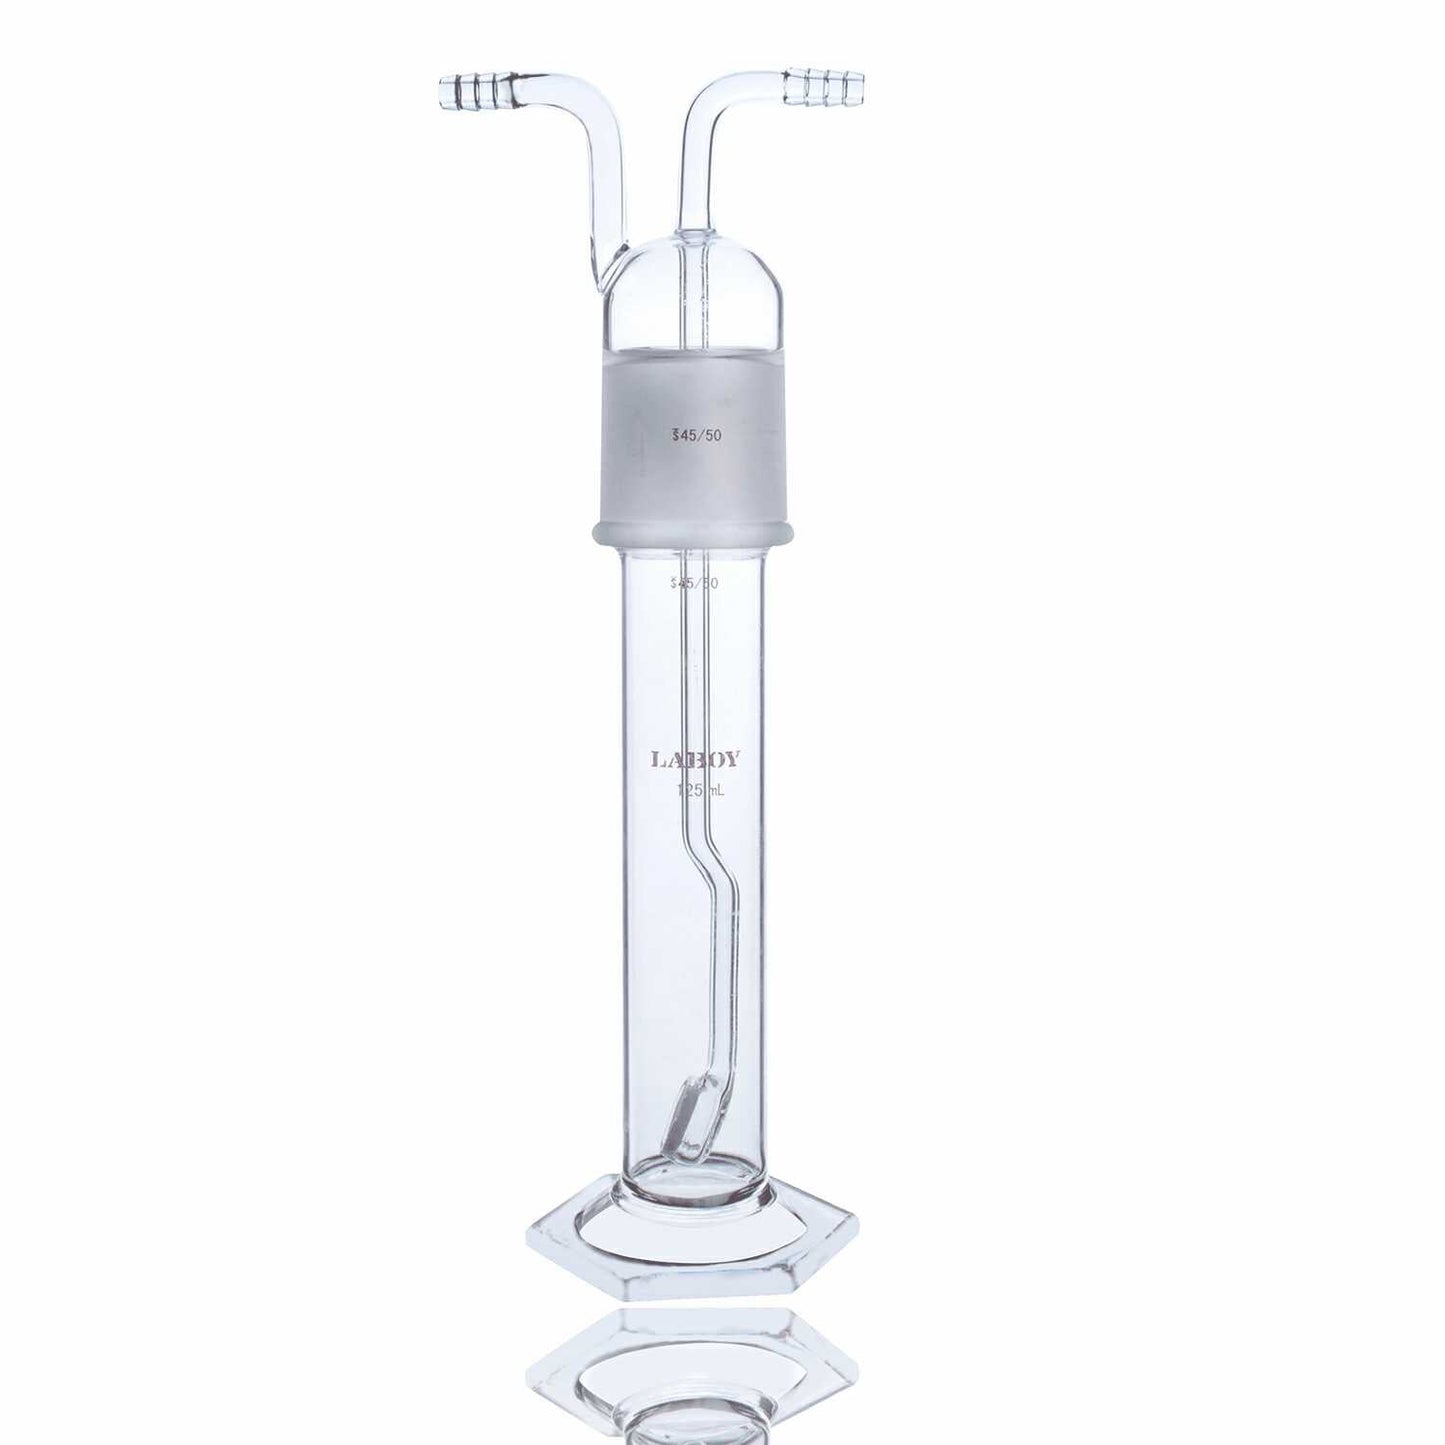 Glass Fritted Gas-washing bottle With Standard Taper Joints - Scienmart